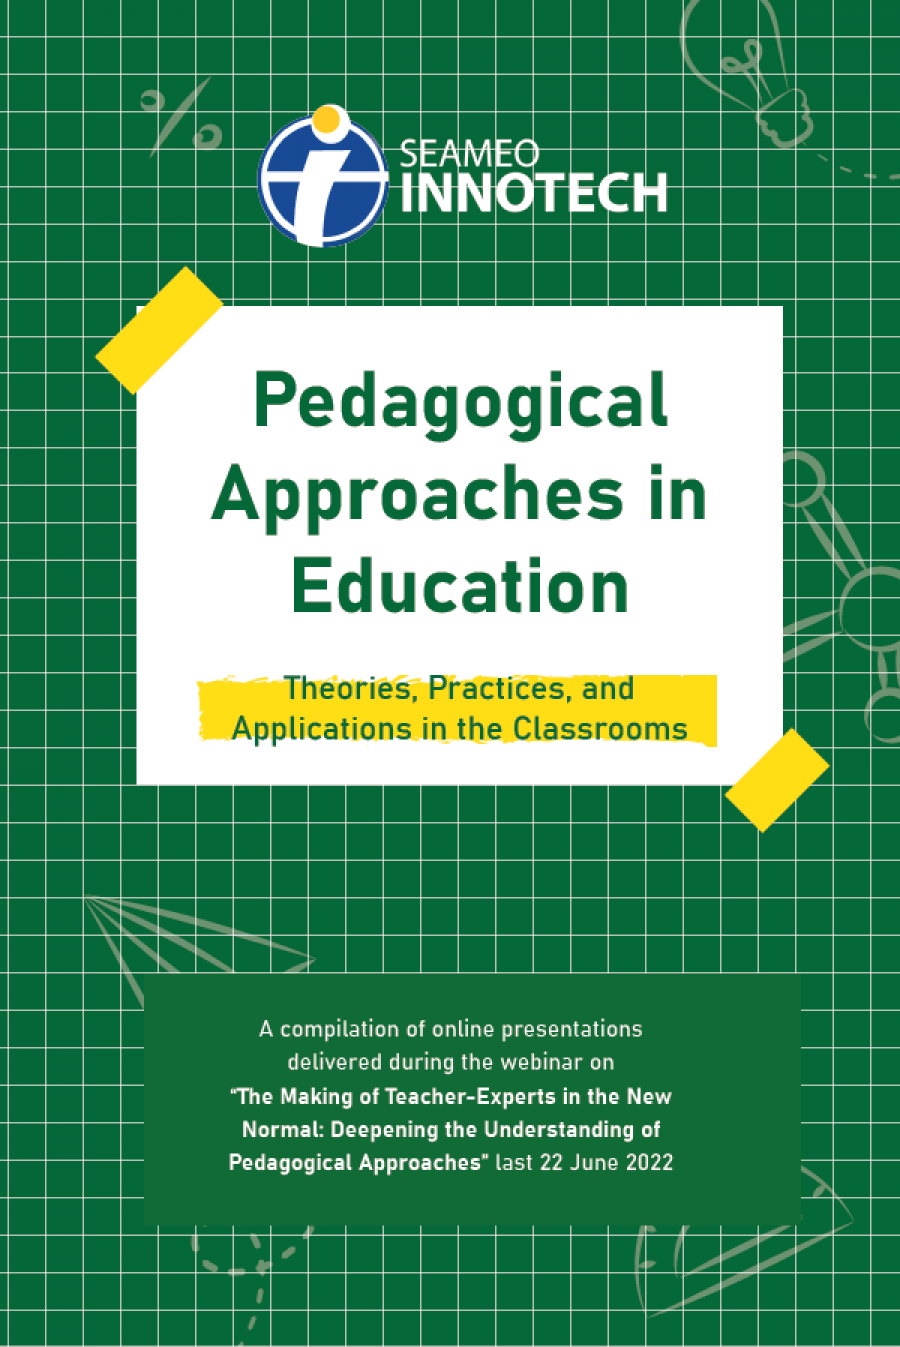 Pedagogical Approaches in Education: Theories, Practices, and Applications in the Classrooms